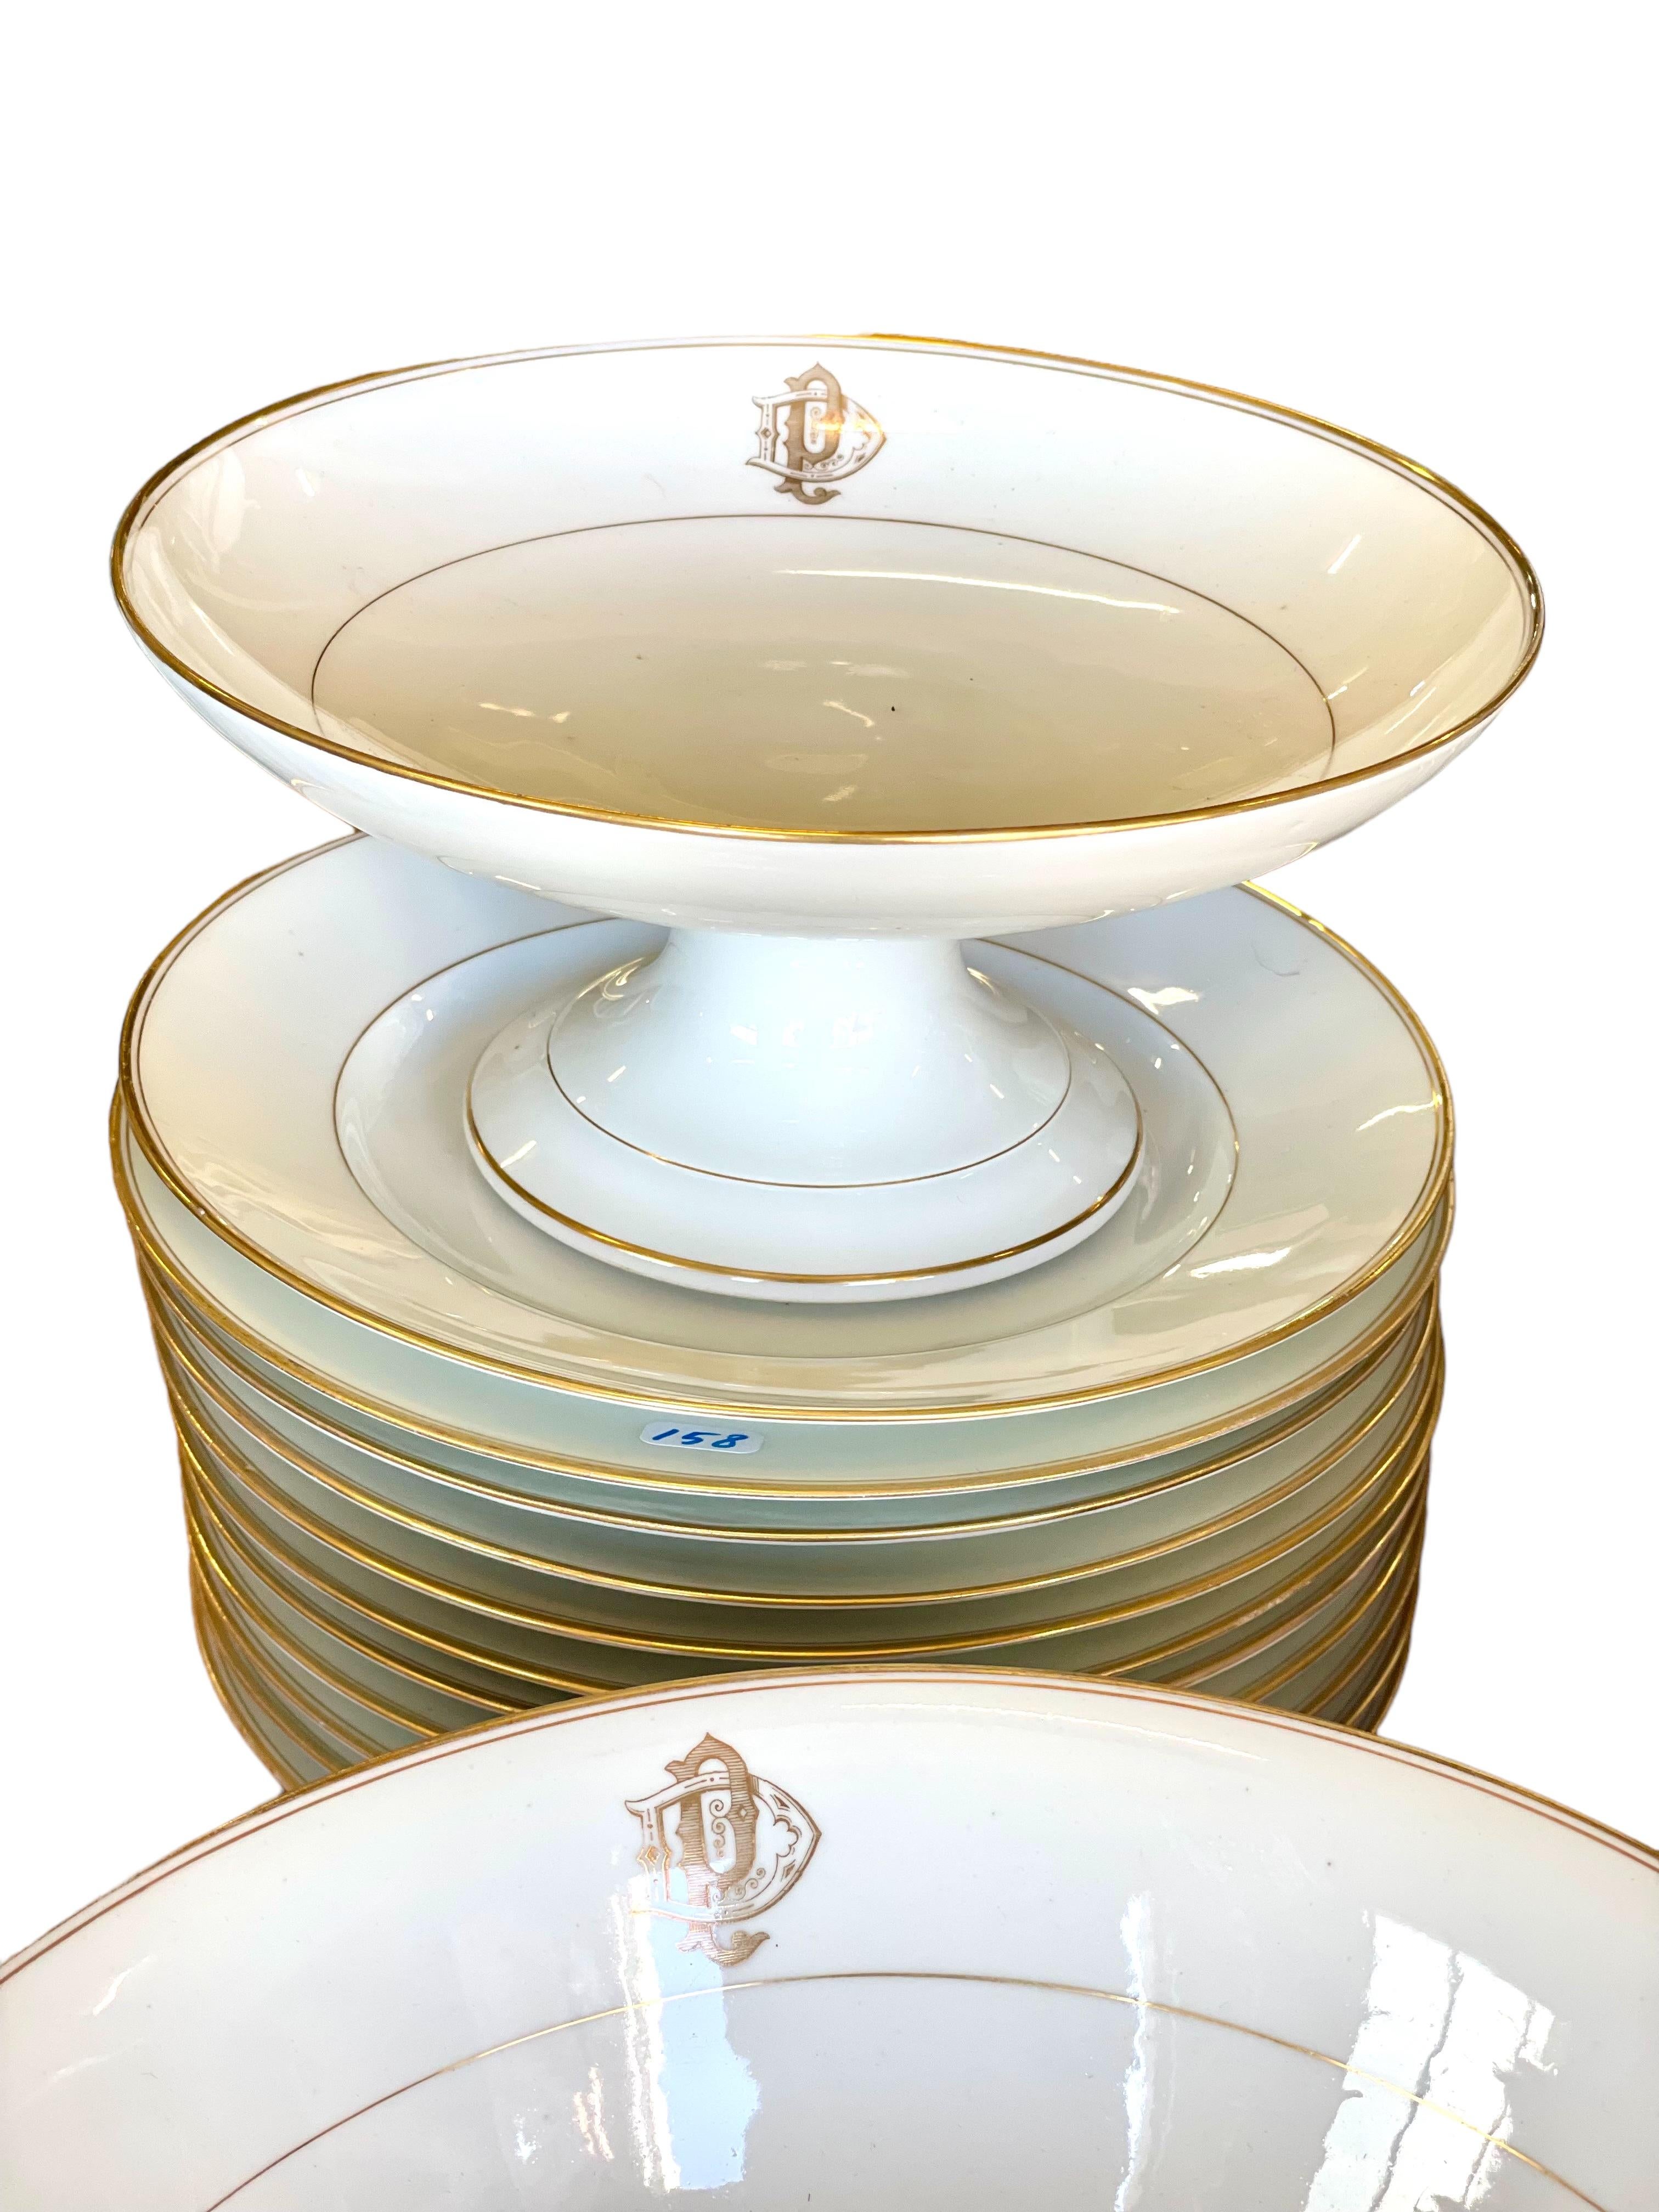 Louis XV Limoges Porcelain Set of 50 Piece Dinner Service with Gilt Edges and Monogramme For Sale